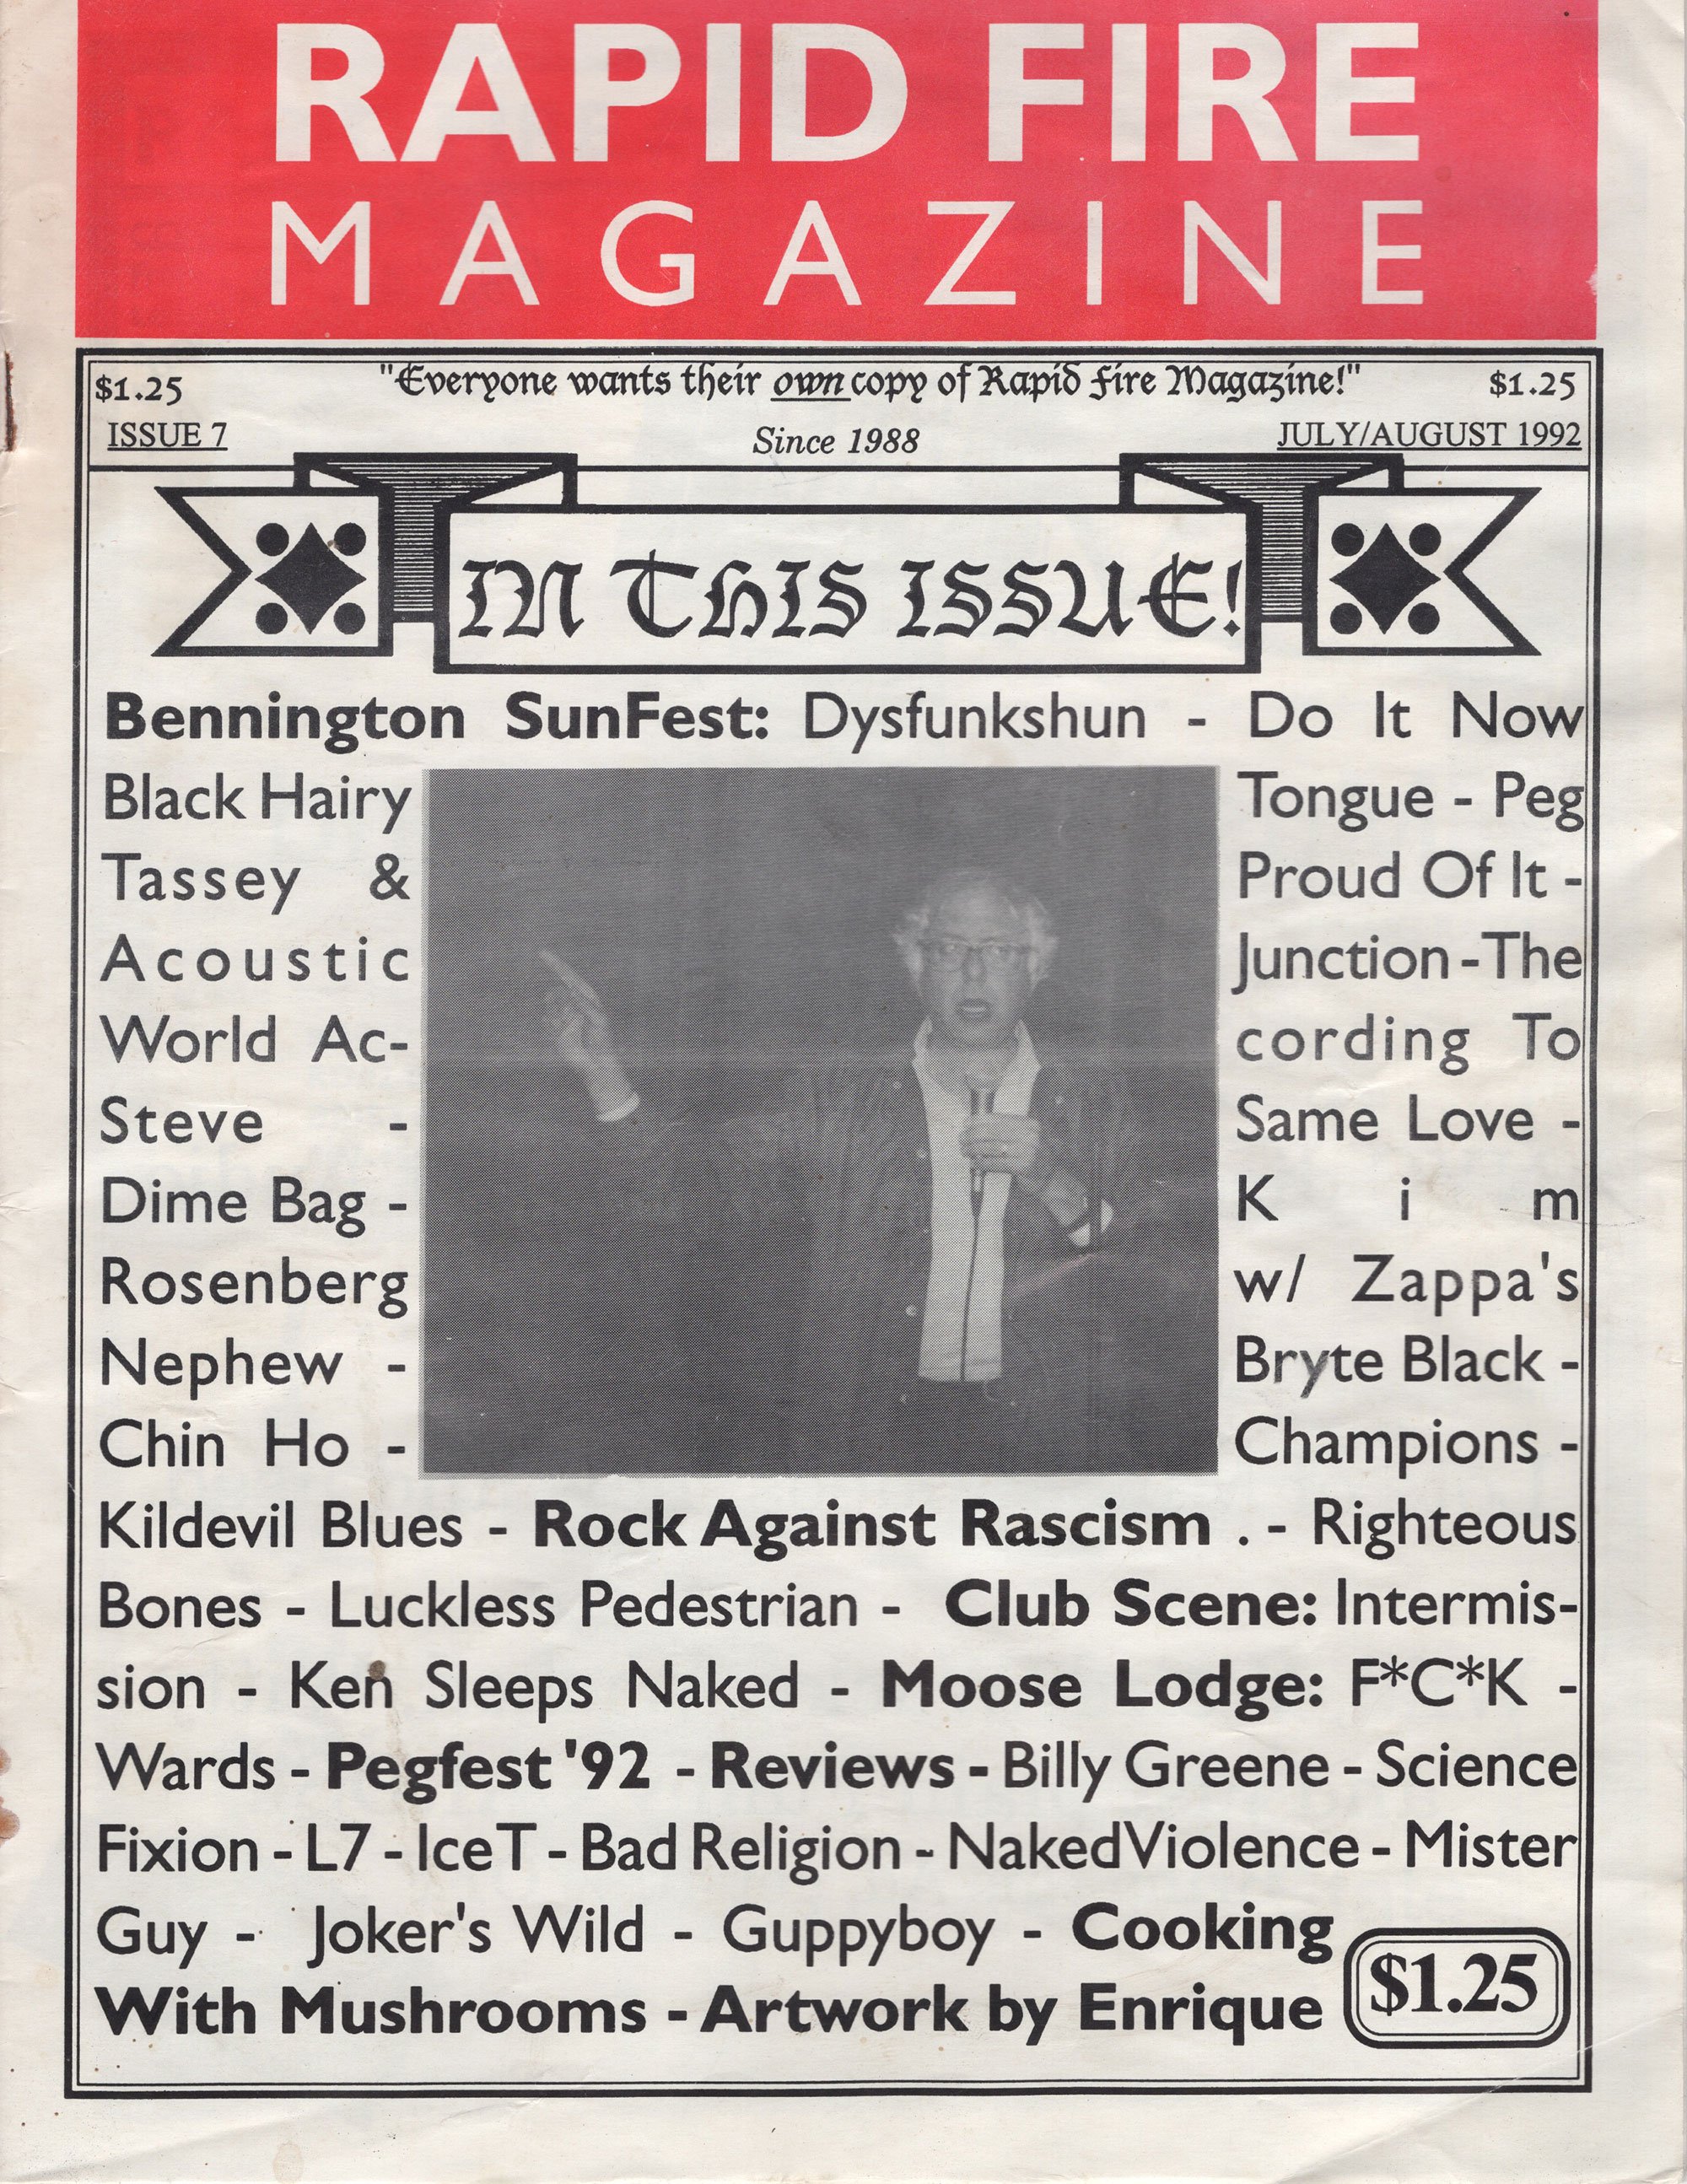 Rapid Fire Magazine, Issue #7, July/August 1992